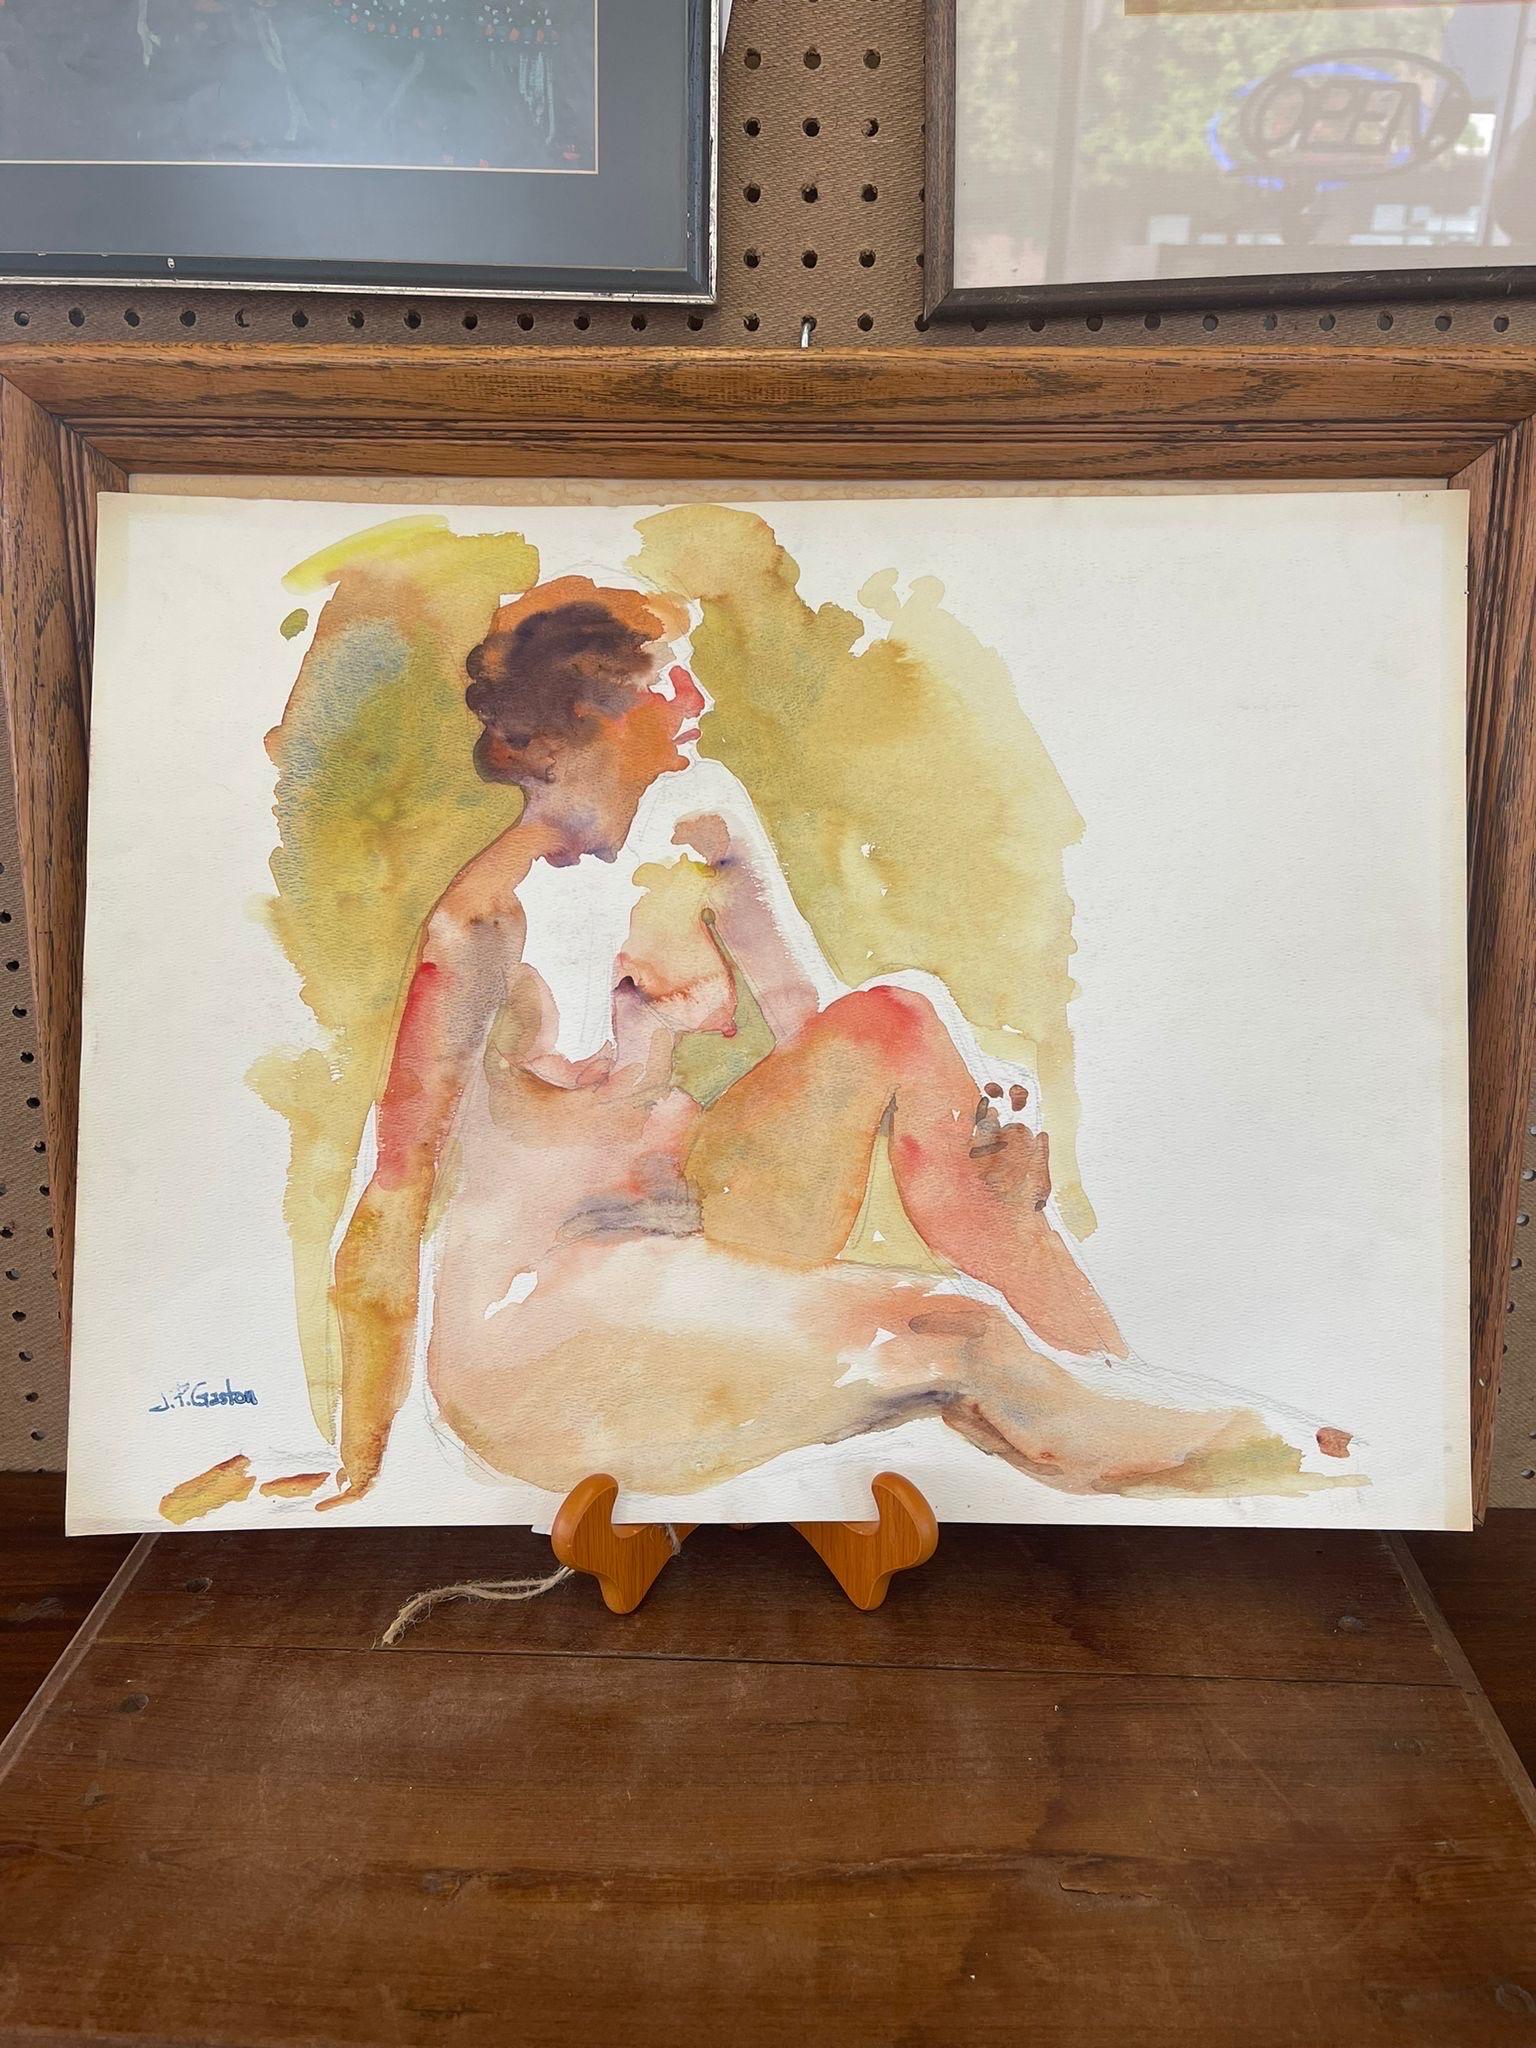 Nude Portrait of a Woman. Bright Colors, Appears to be Watercolor on Paper. Signed JP Gaston. Wear and Tear Consistent with Age.

Dimensions. 24 W ; 18 D